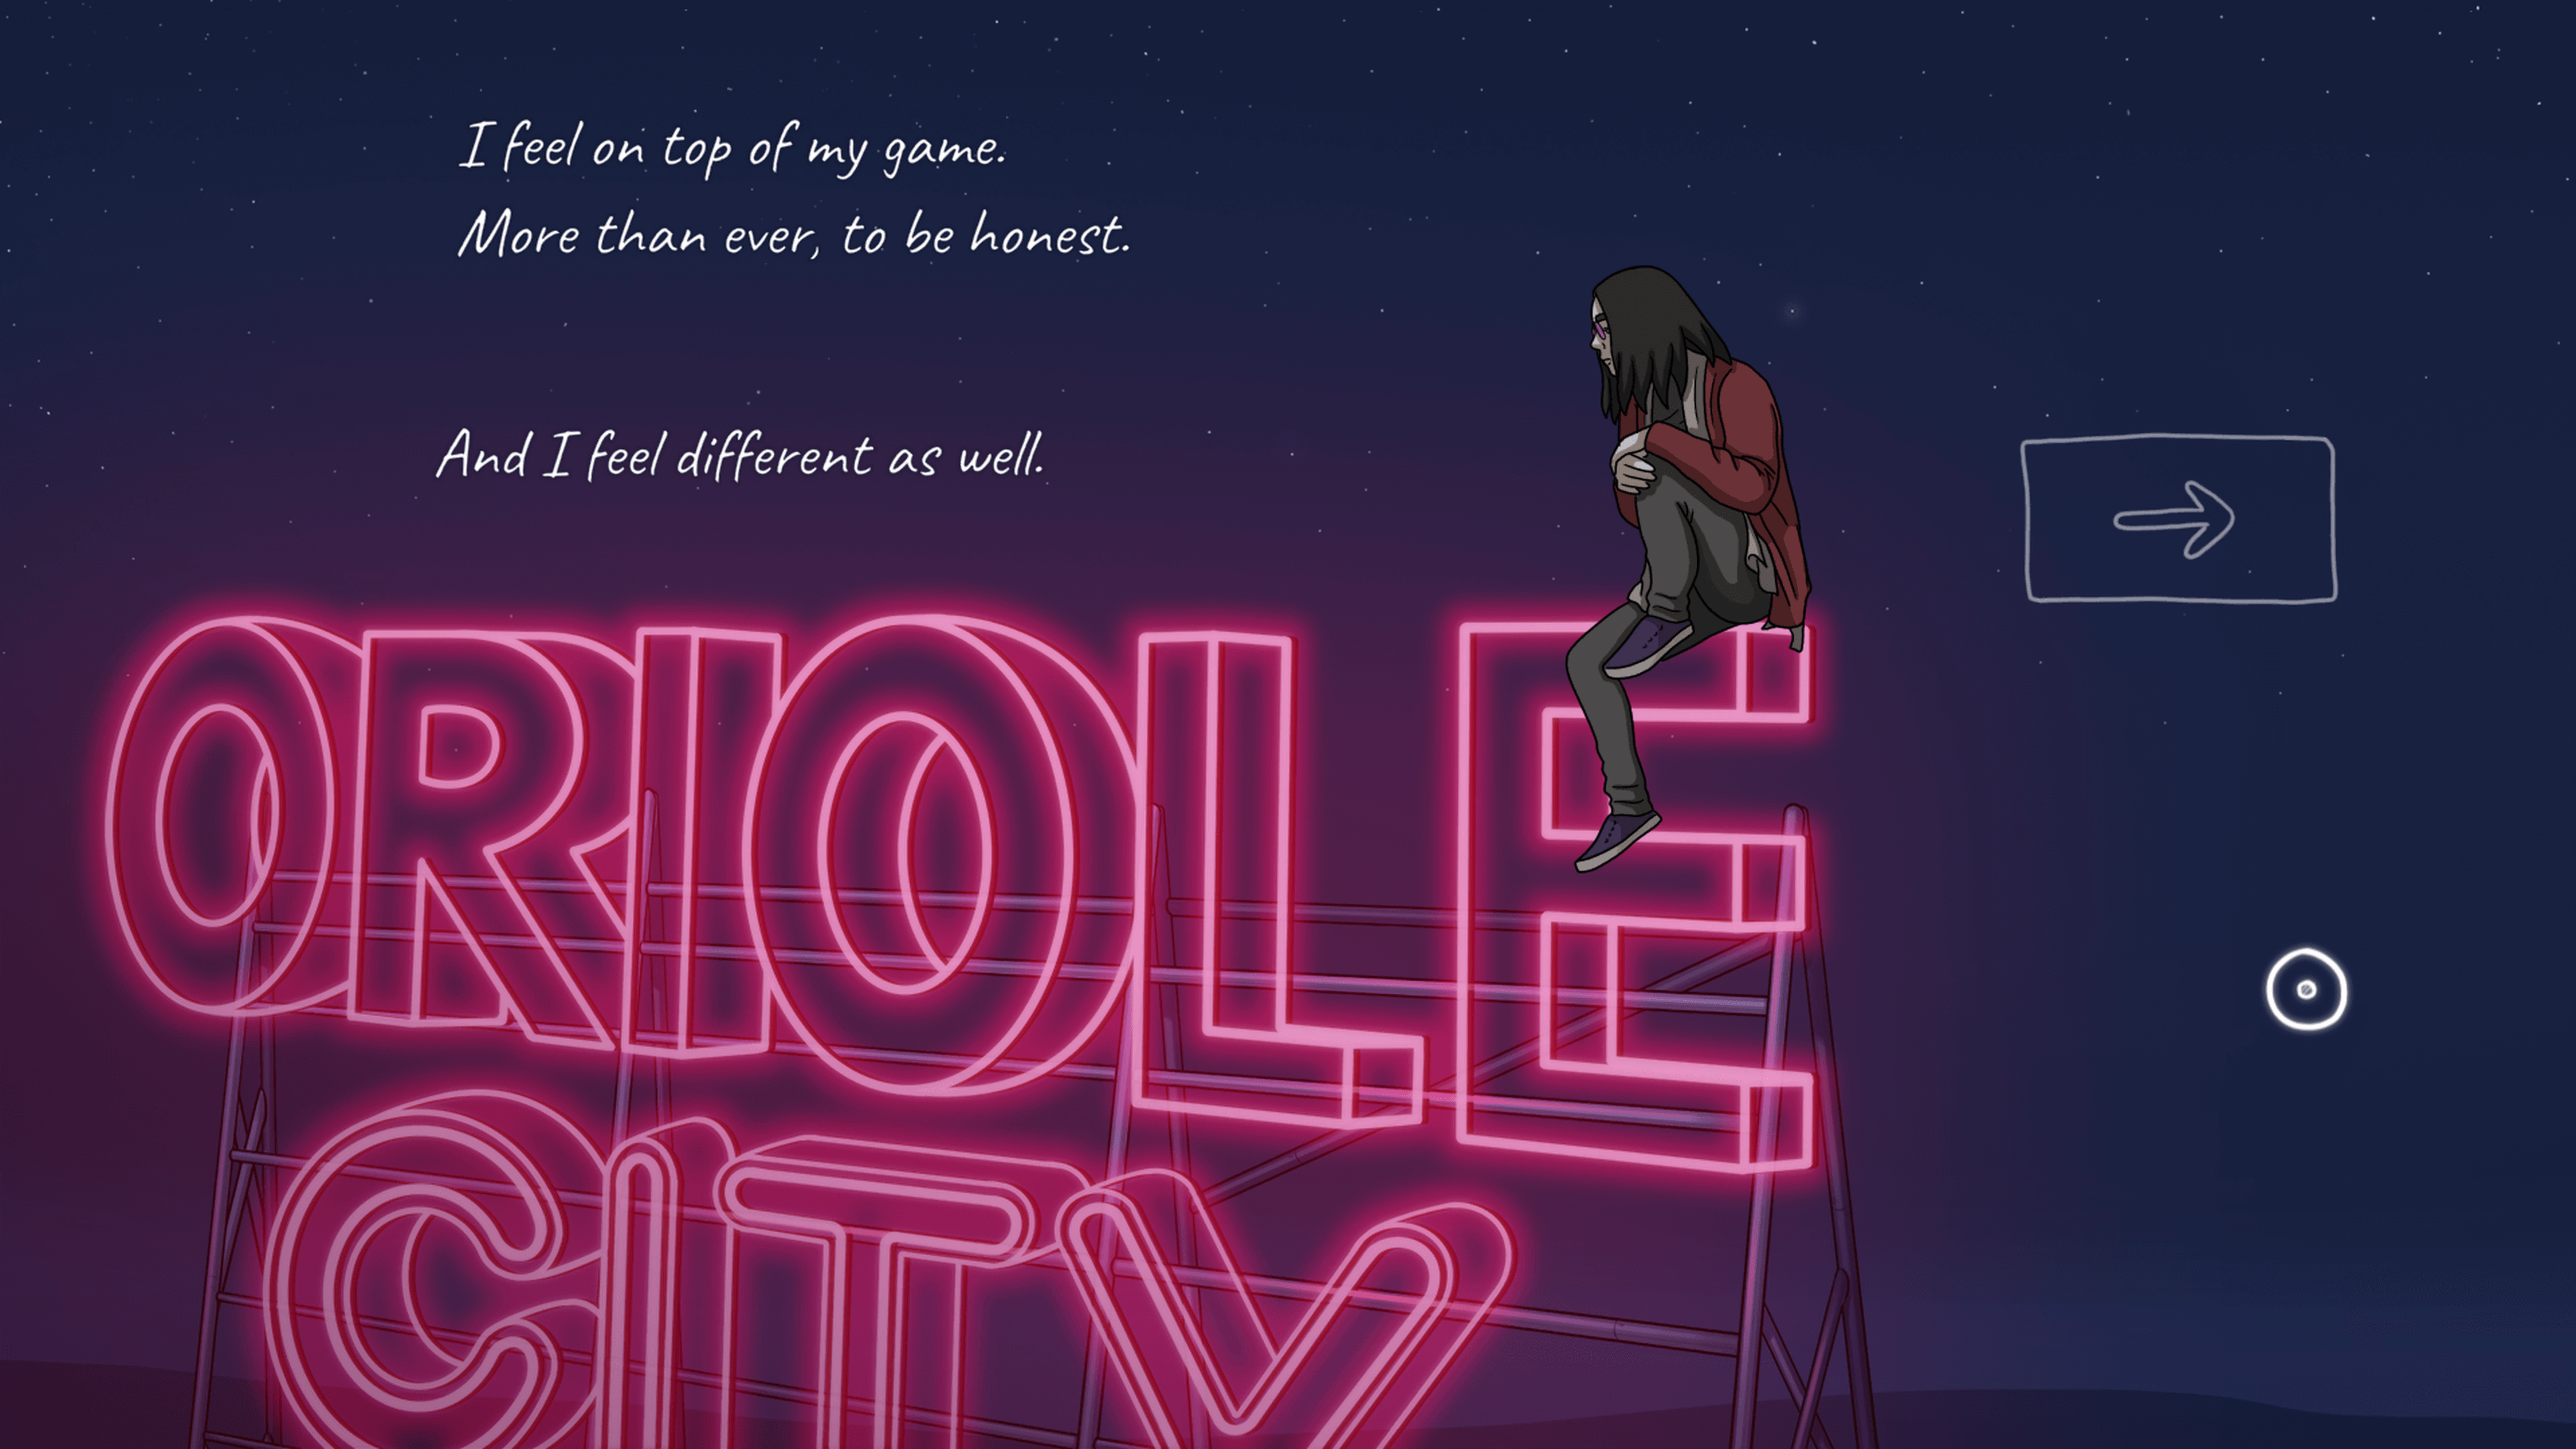 a starry night sky behind a pink neon sign that reads "ORIOLE CITY". A character with long black hair and wearing a red hoodie sits on the top of the "E" while deep in thought. The characters inner thoughts are written in hand drawn style white text reading "I feel on top of my game. More than ever, to be honest. And I feel different as well."